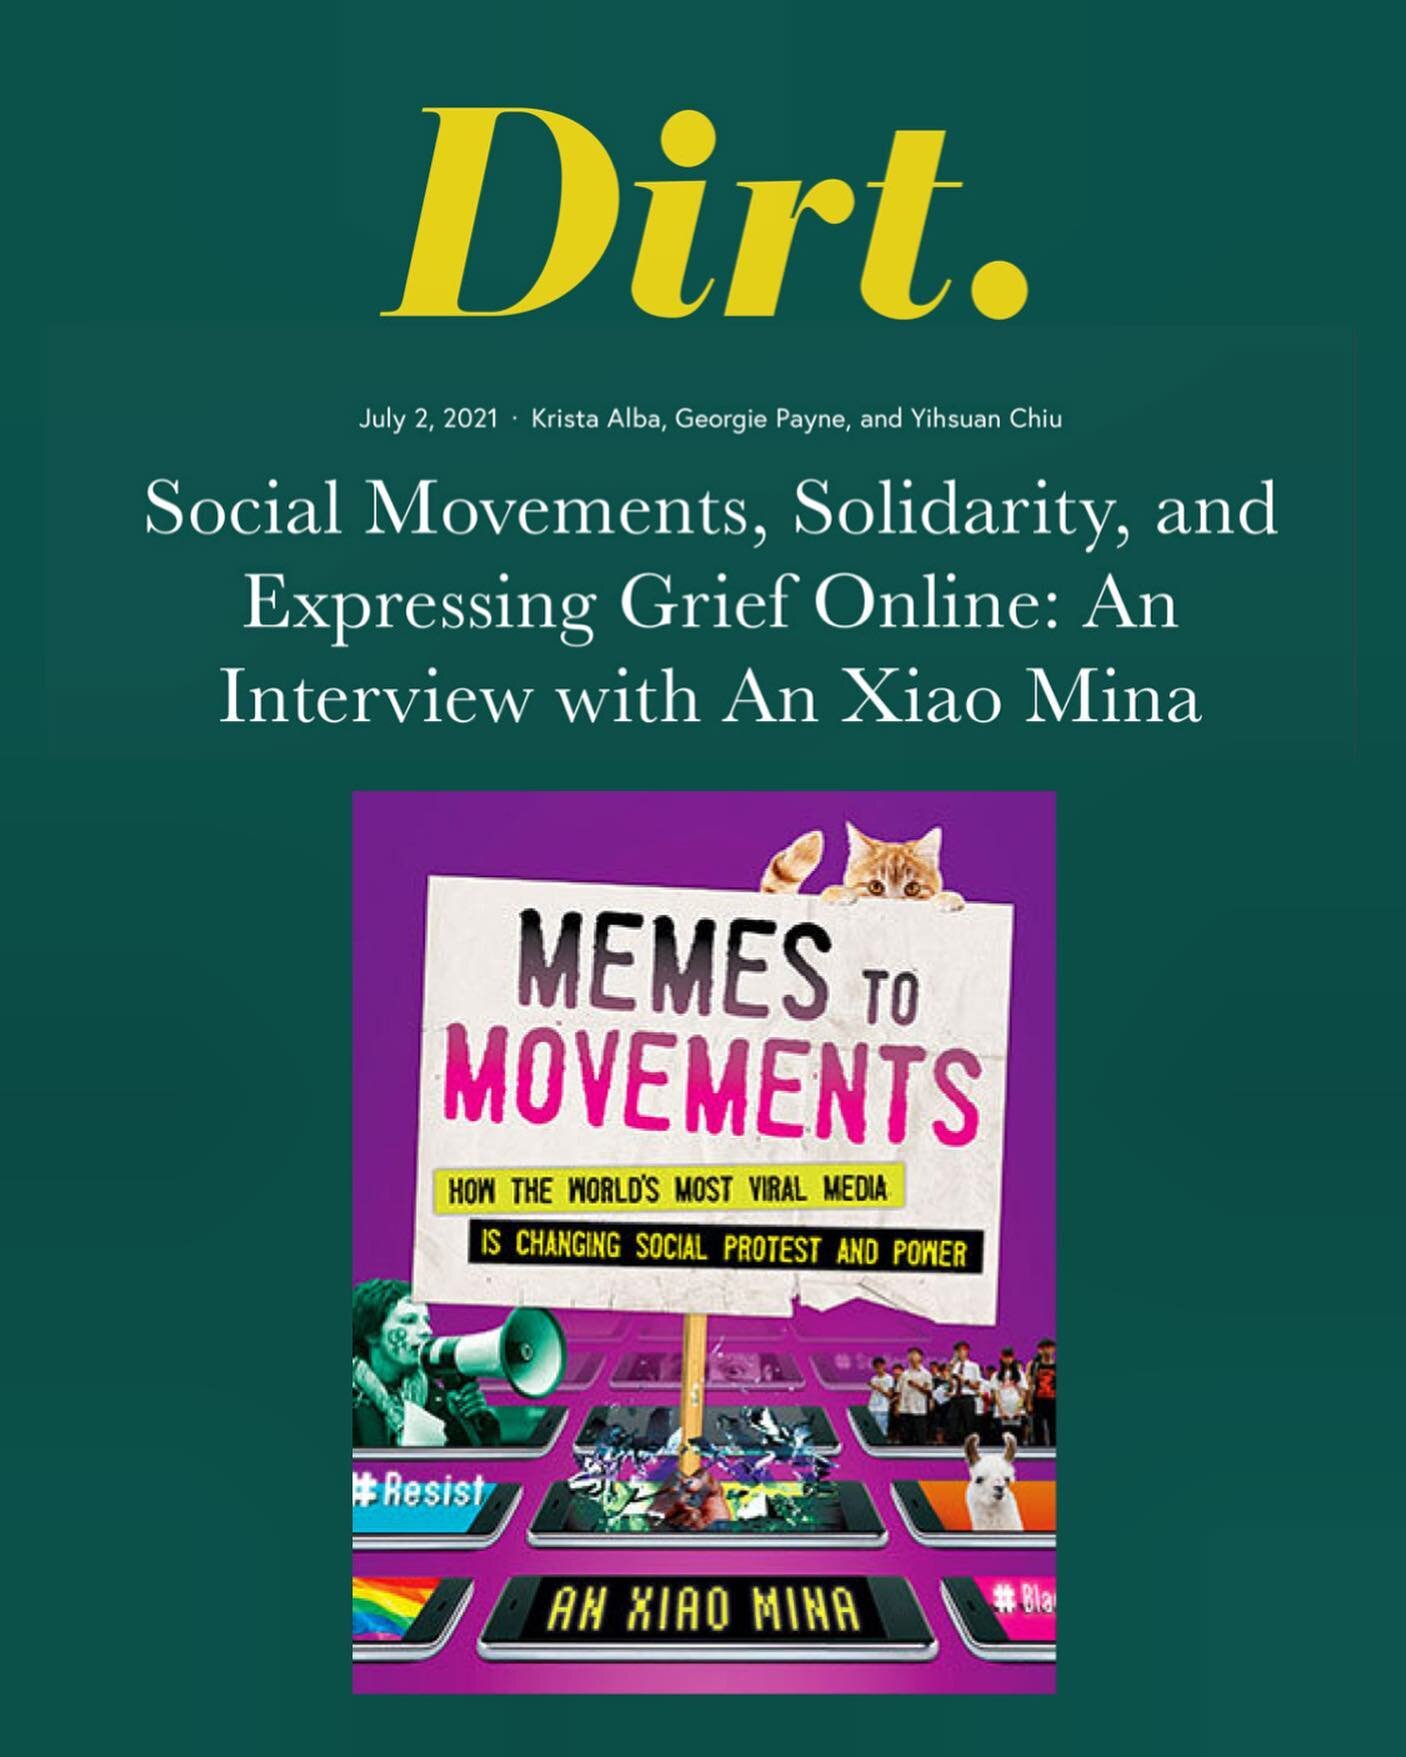 Three emerging curators and recent graduates of @ccsbard (Krista Alba, Yihsuan Chiu, and Georgie Payne) speak with An Xiao Mina (artist, leading technologist, digital scholar, and author of Memes to Movements: How the World's Most Viral Media Is Chan